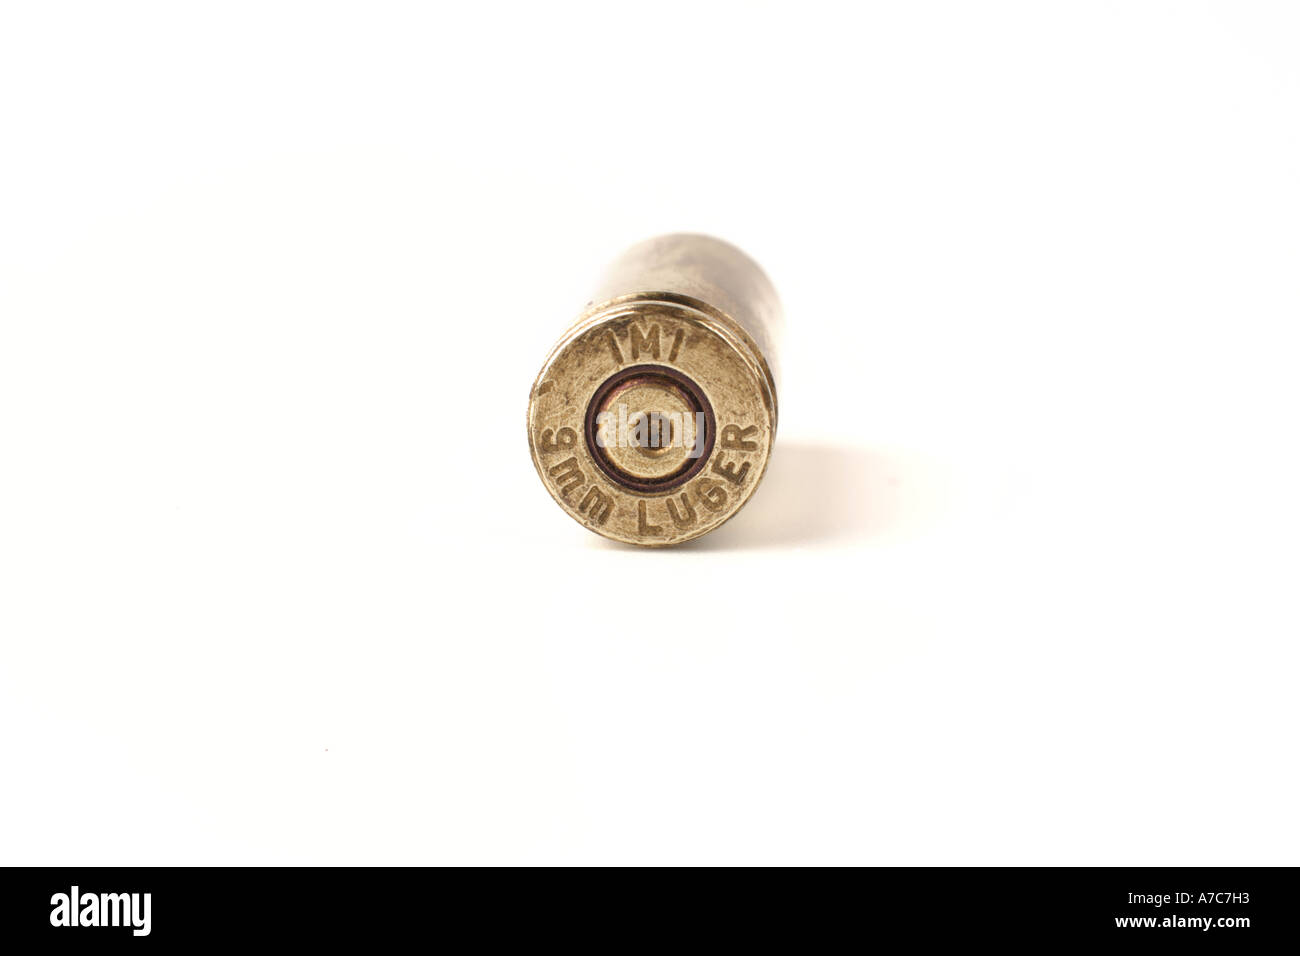 Luger 9mm fired bullet shell case Stock Photo - Alamy